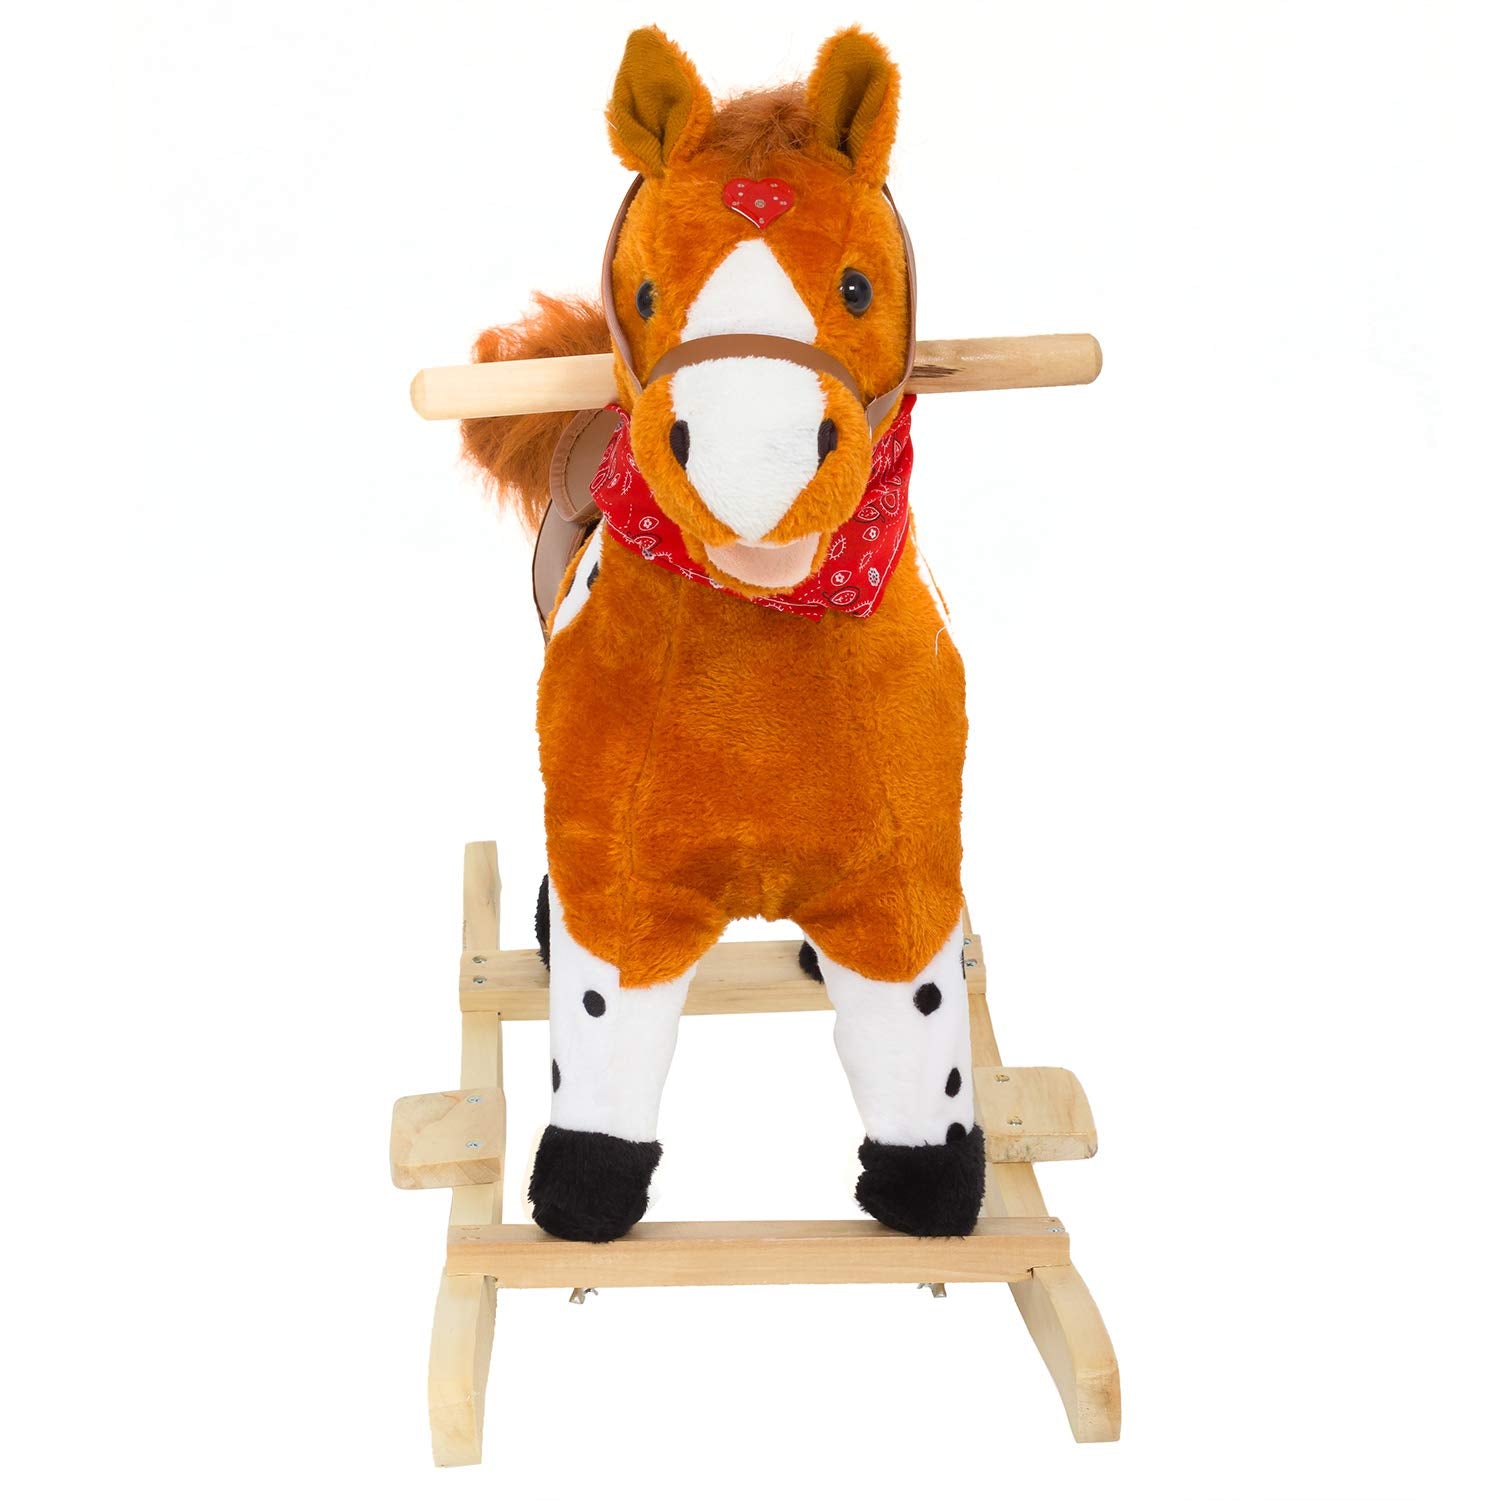 Rocking Horse Plush Ride on Toy with Adjustable Foot Stirrups and Sounds for Toddlers